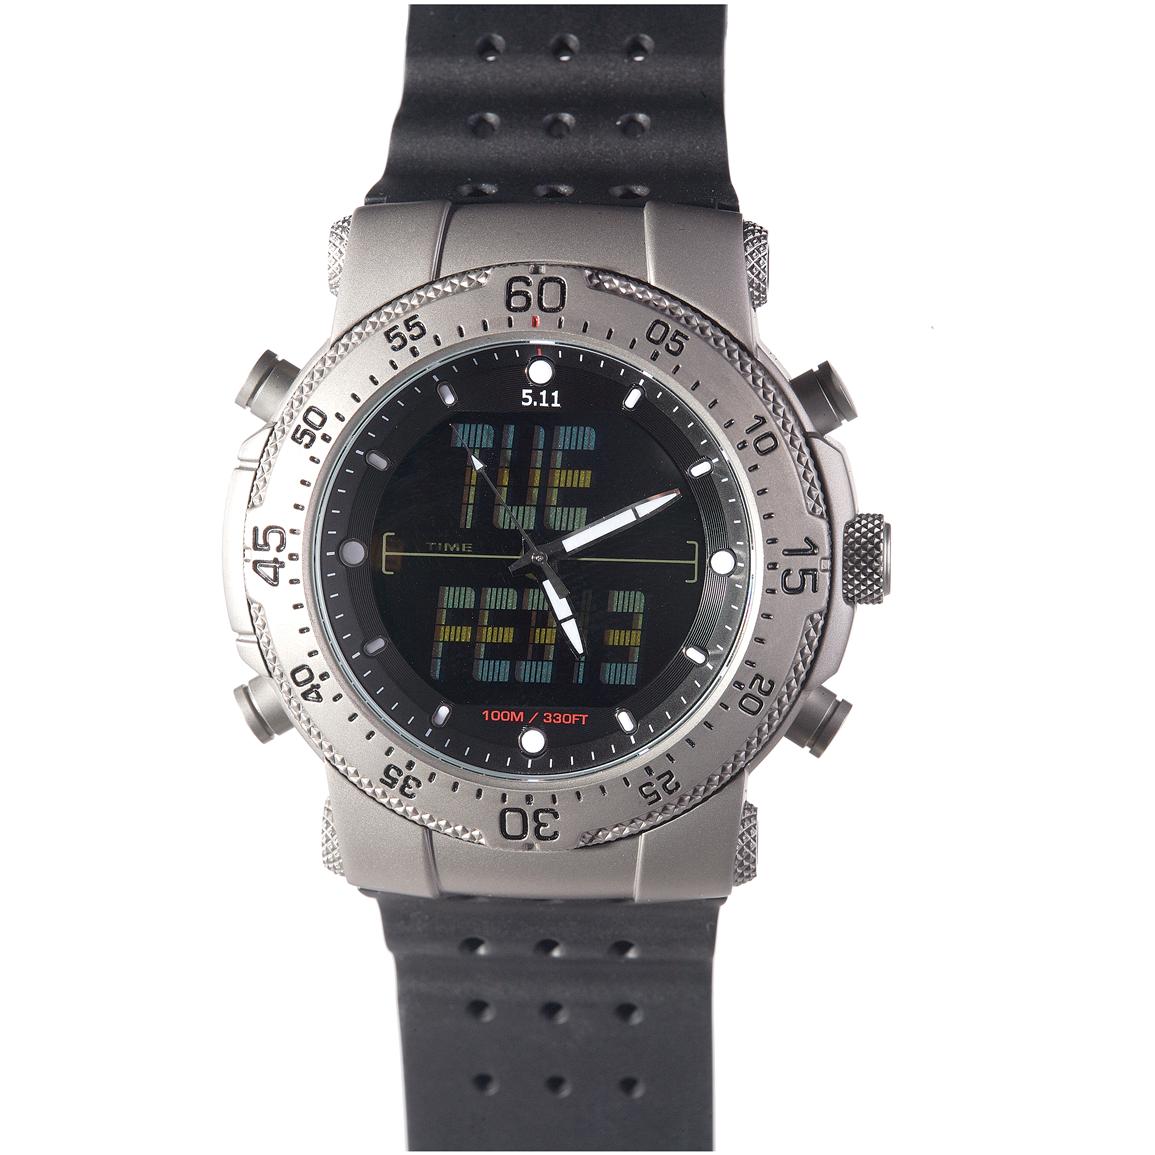 5 11 Tactical Titanium Hrt Watch 165060 Watches At Sportsman S Guide